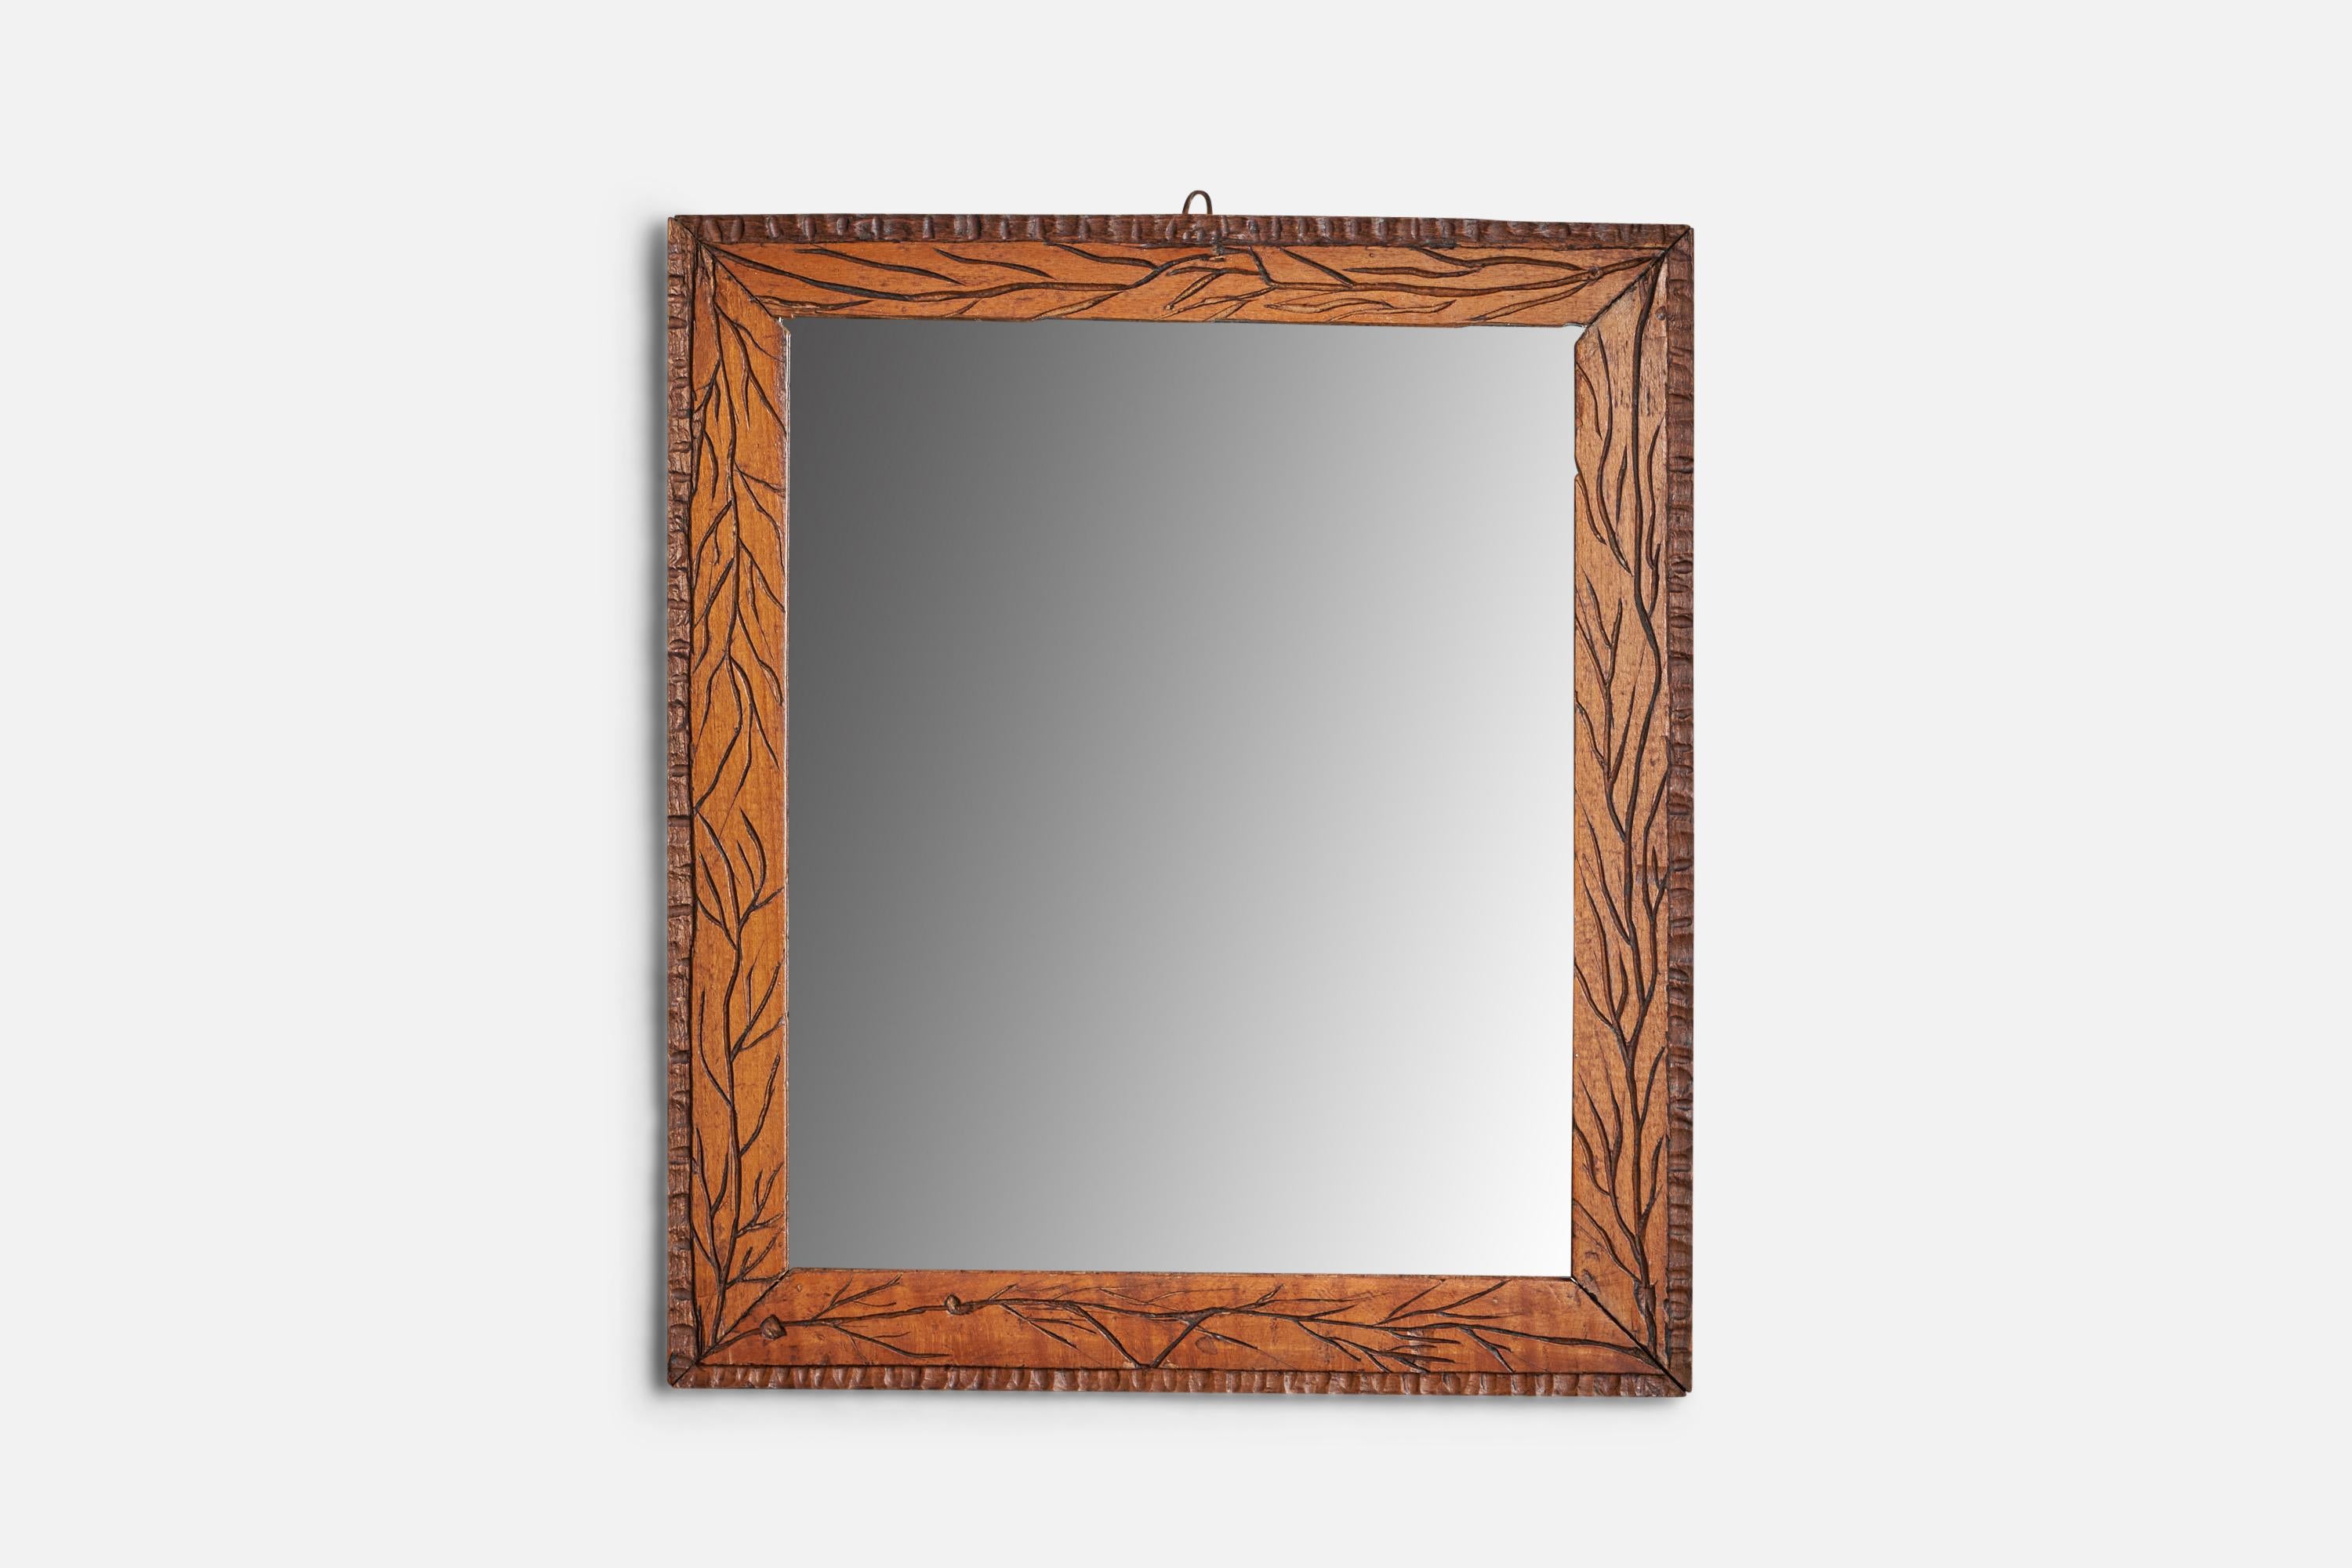 A carved wood wall mirror designed and produced in Italy, 1930s.